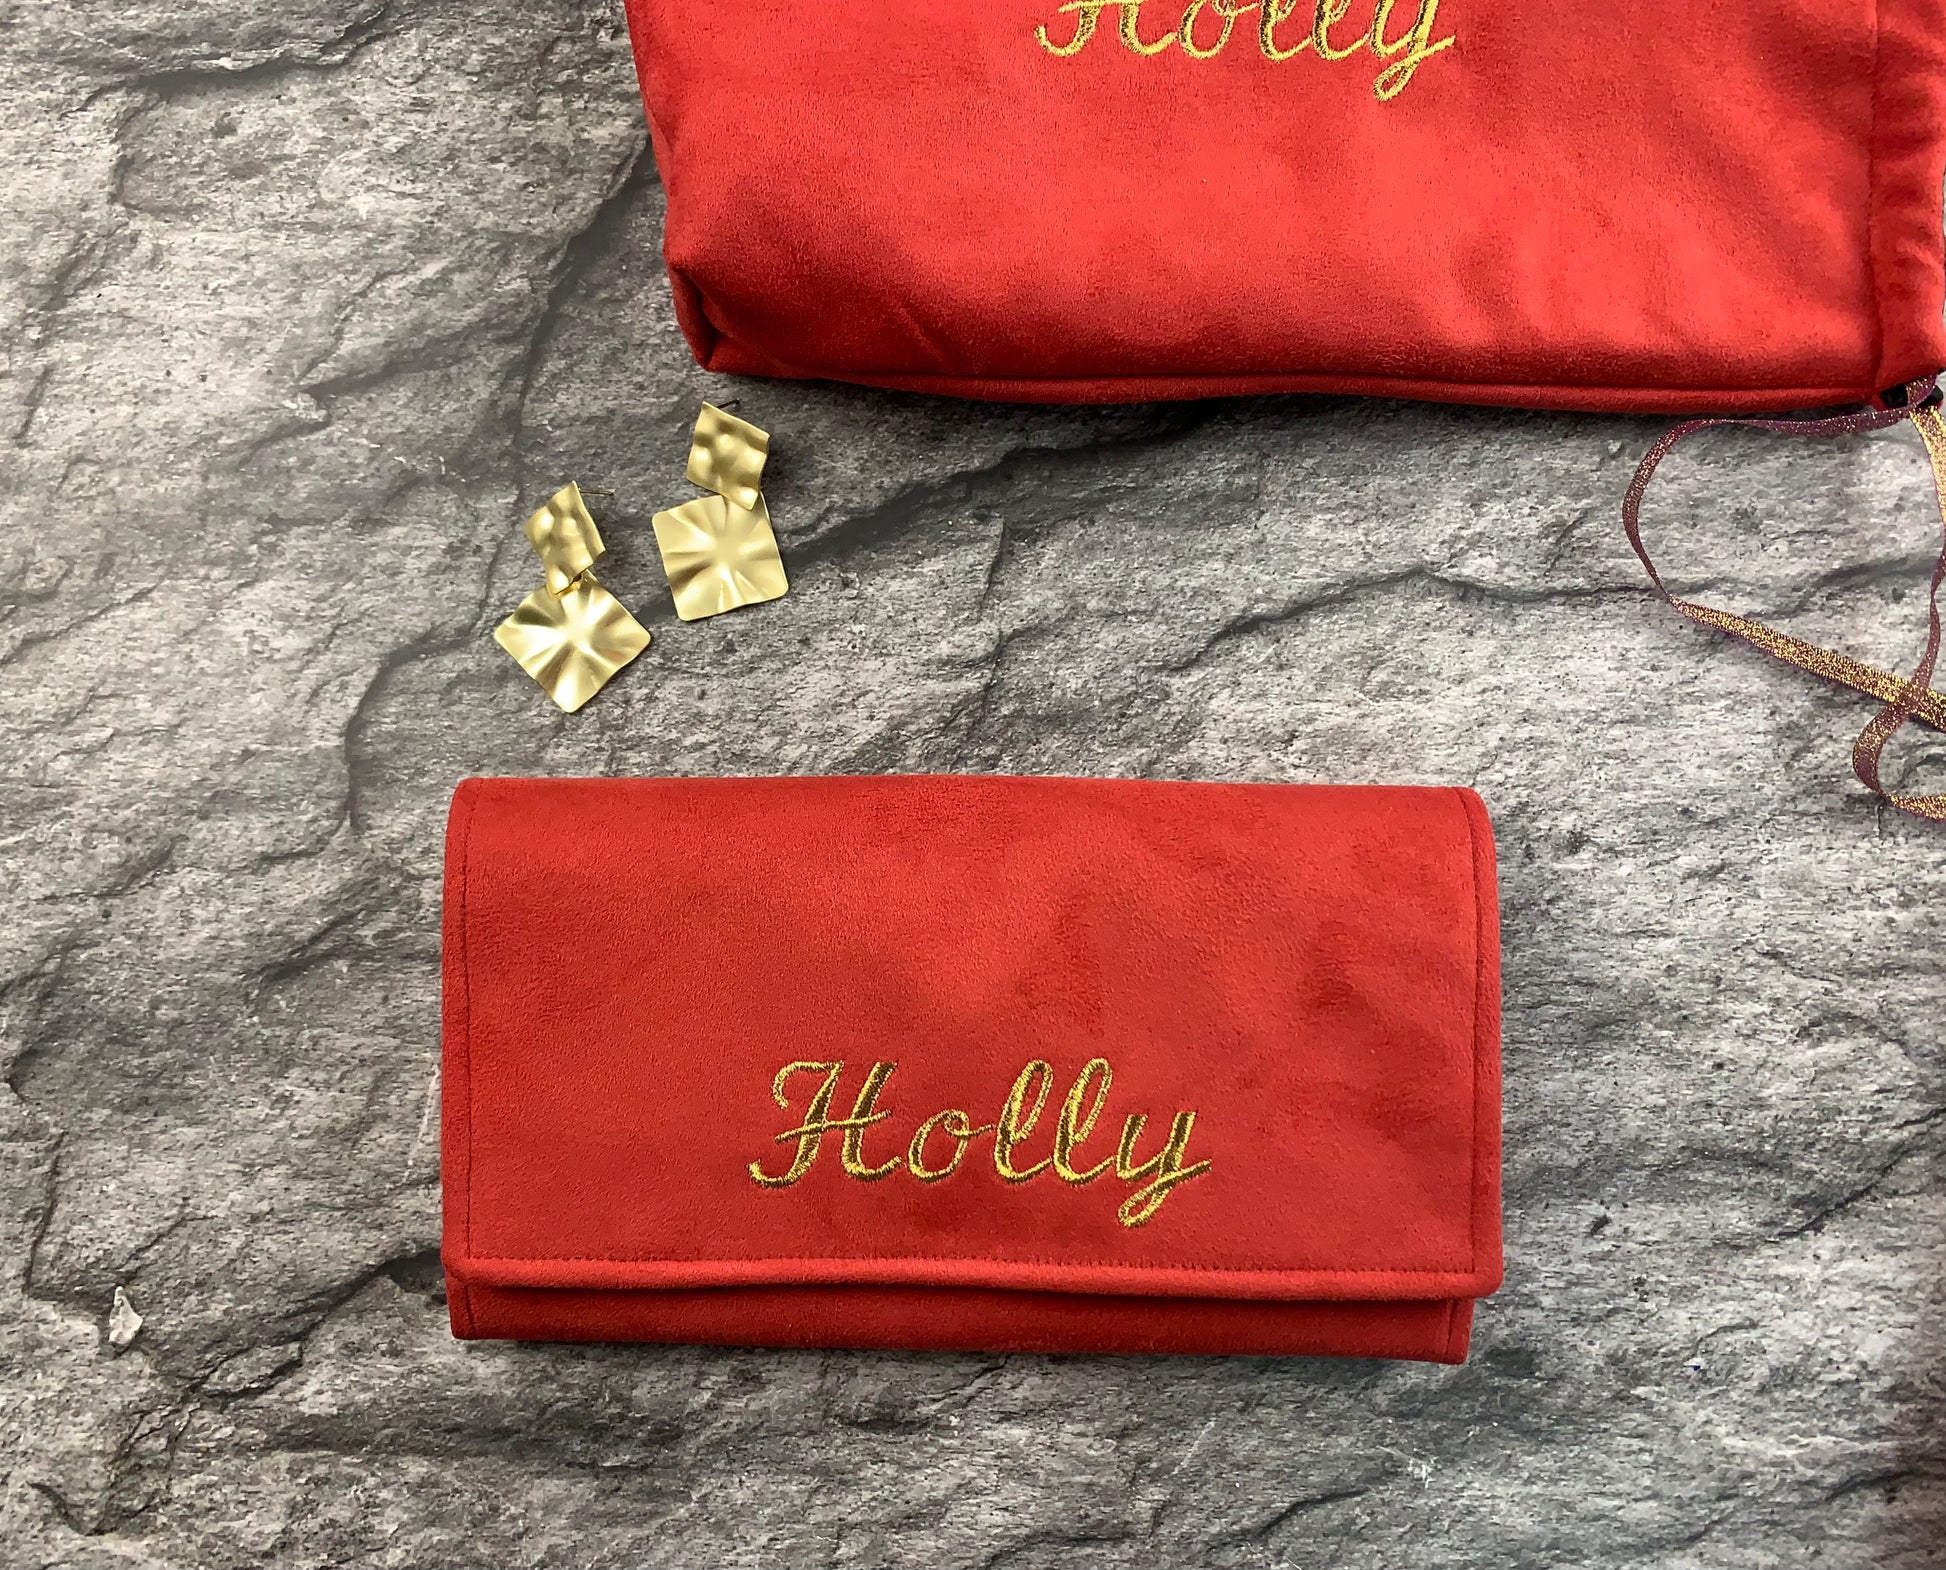 Personalized Travel Jewelry Case - The GLD Shop